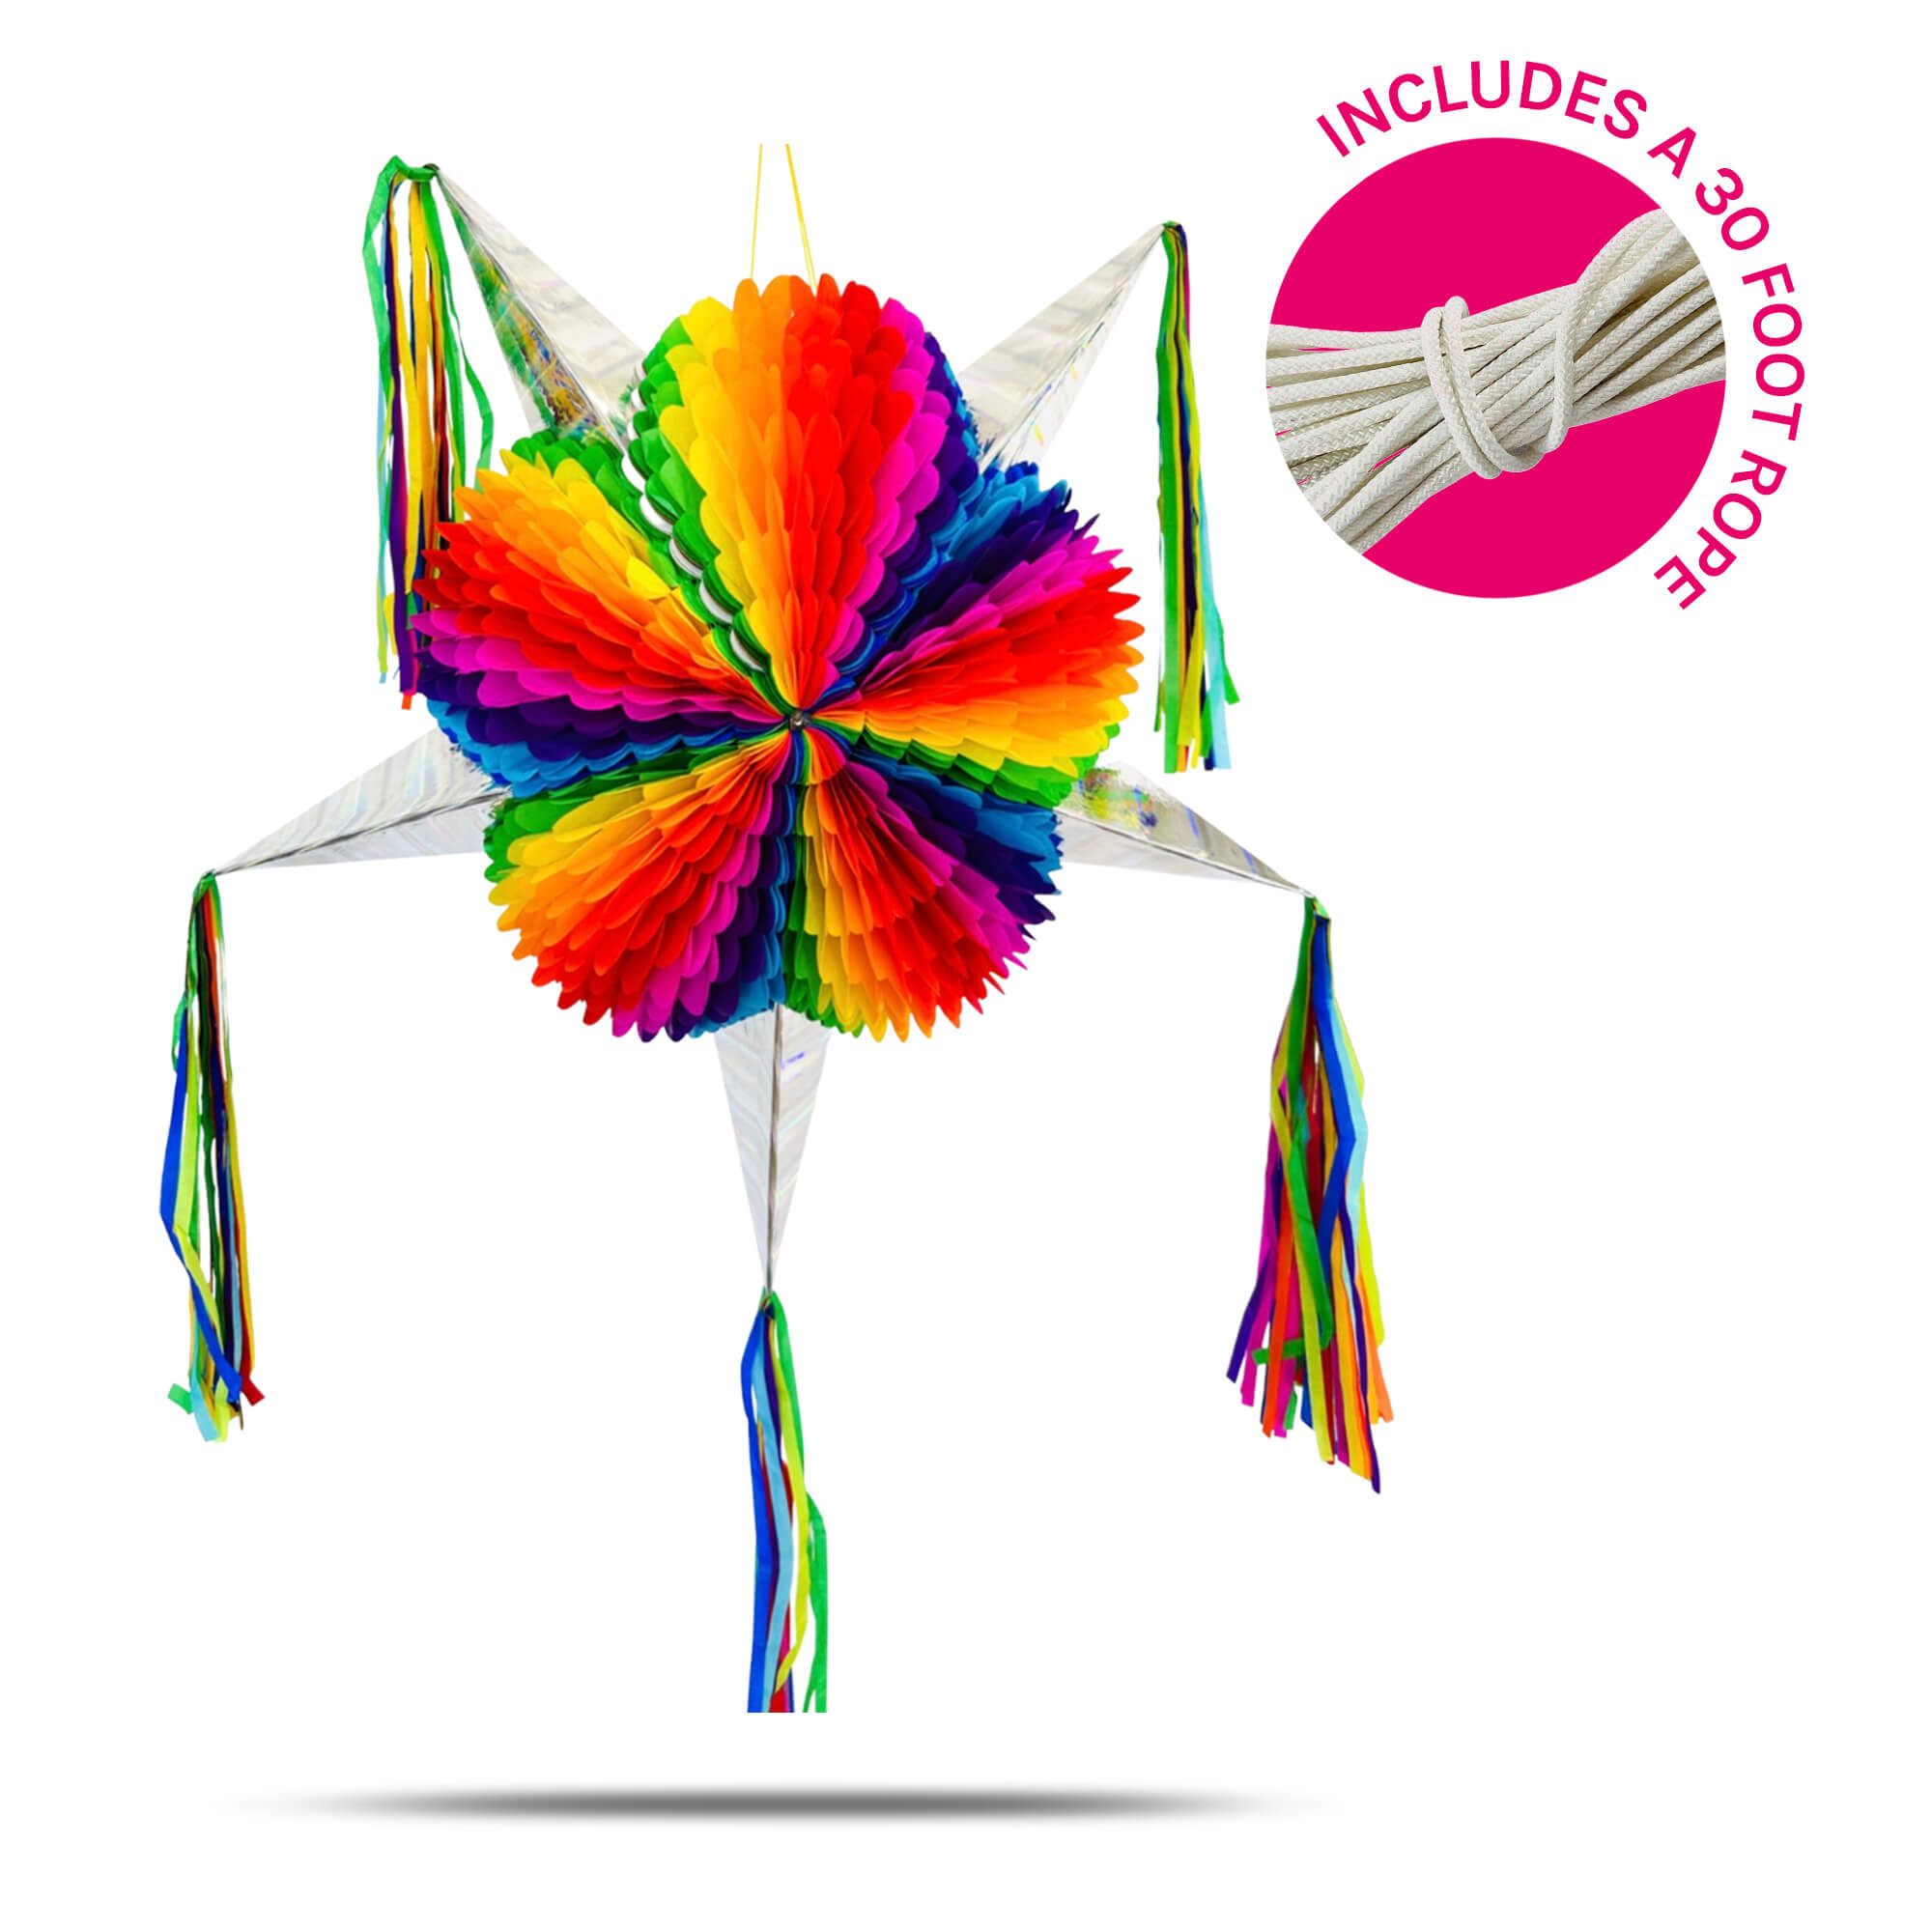 Jumbo Rainbow Mexican Star Piñata with 30 Ft Rope Included, Holds